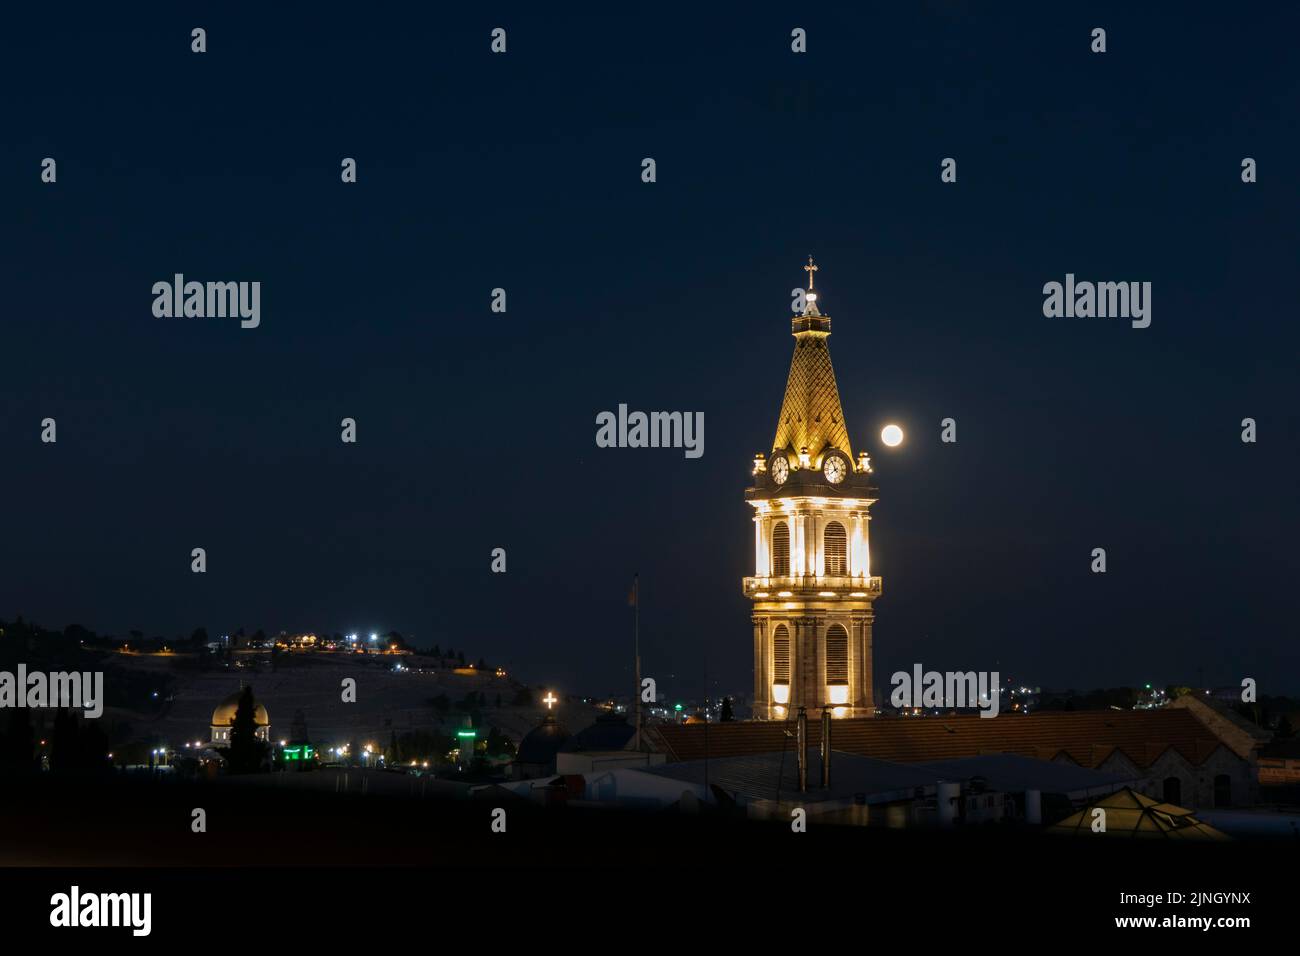 The Sturgeon full moon shines behind the bell tower of the Franciscan Saint Saviour or San Salvador monastery located in Saint Francis street in the Christian Quarter in the old city East Jerusalem Israel Stock Photo